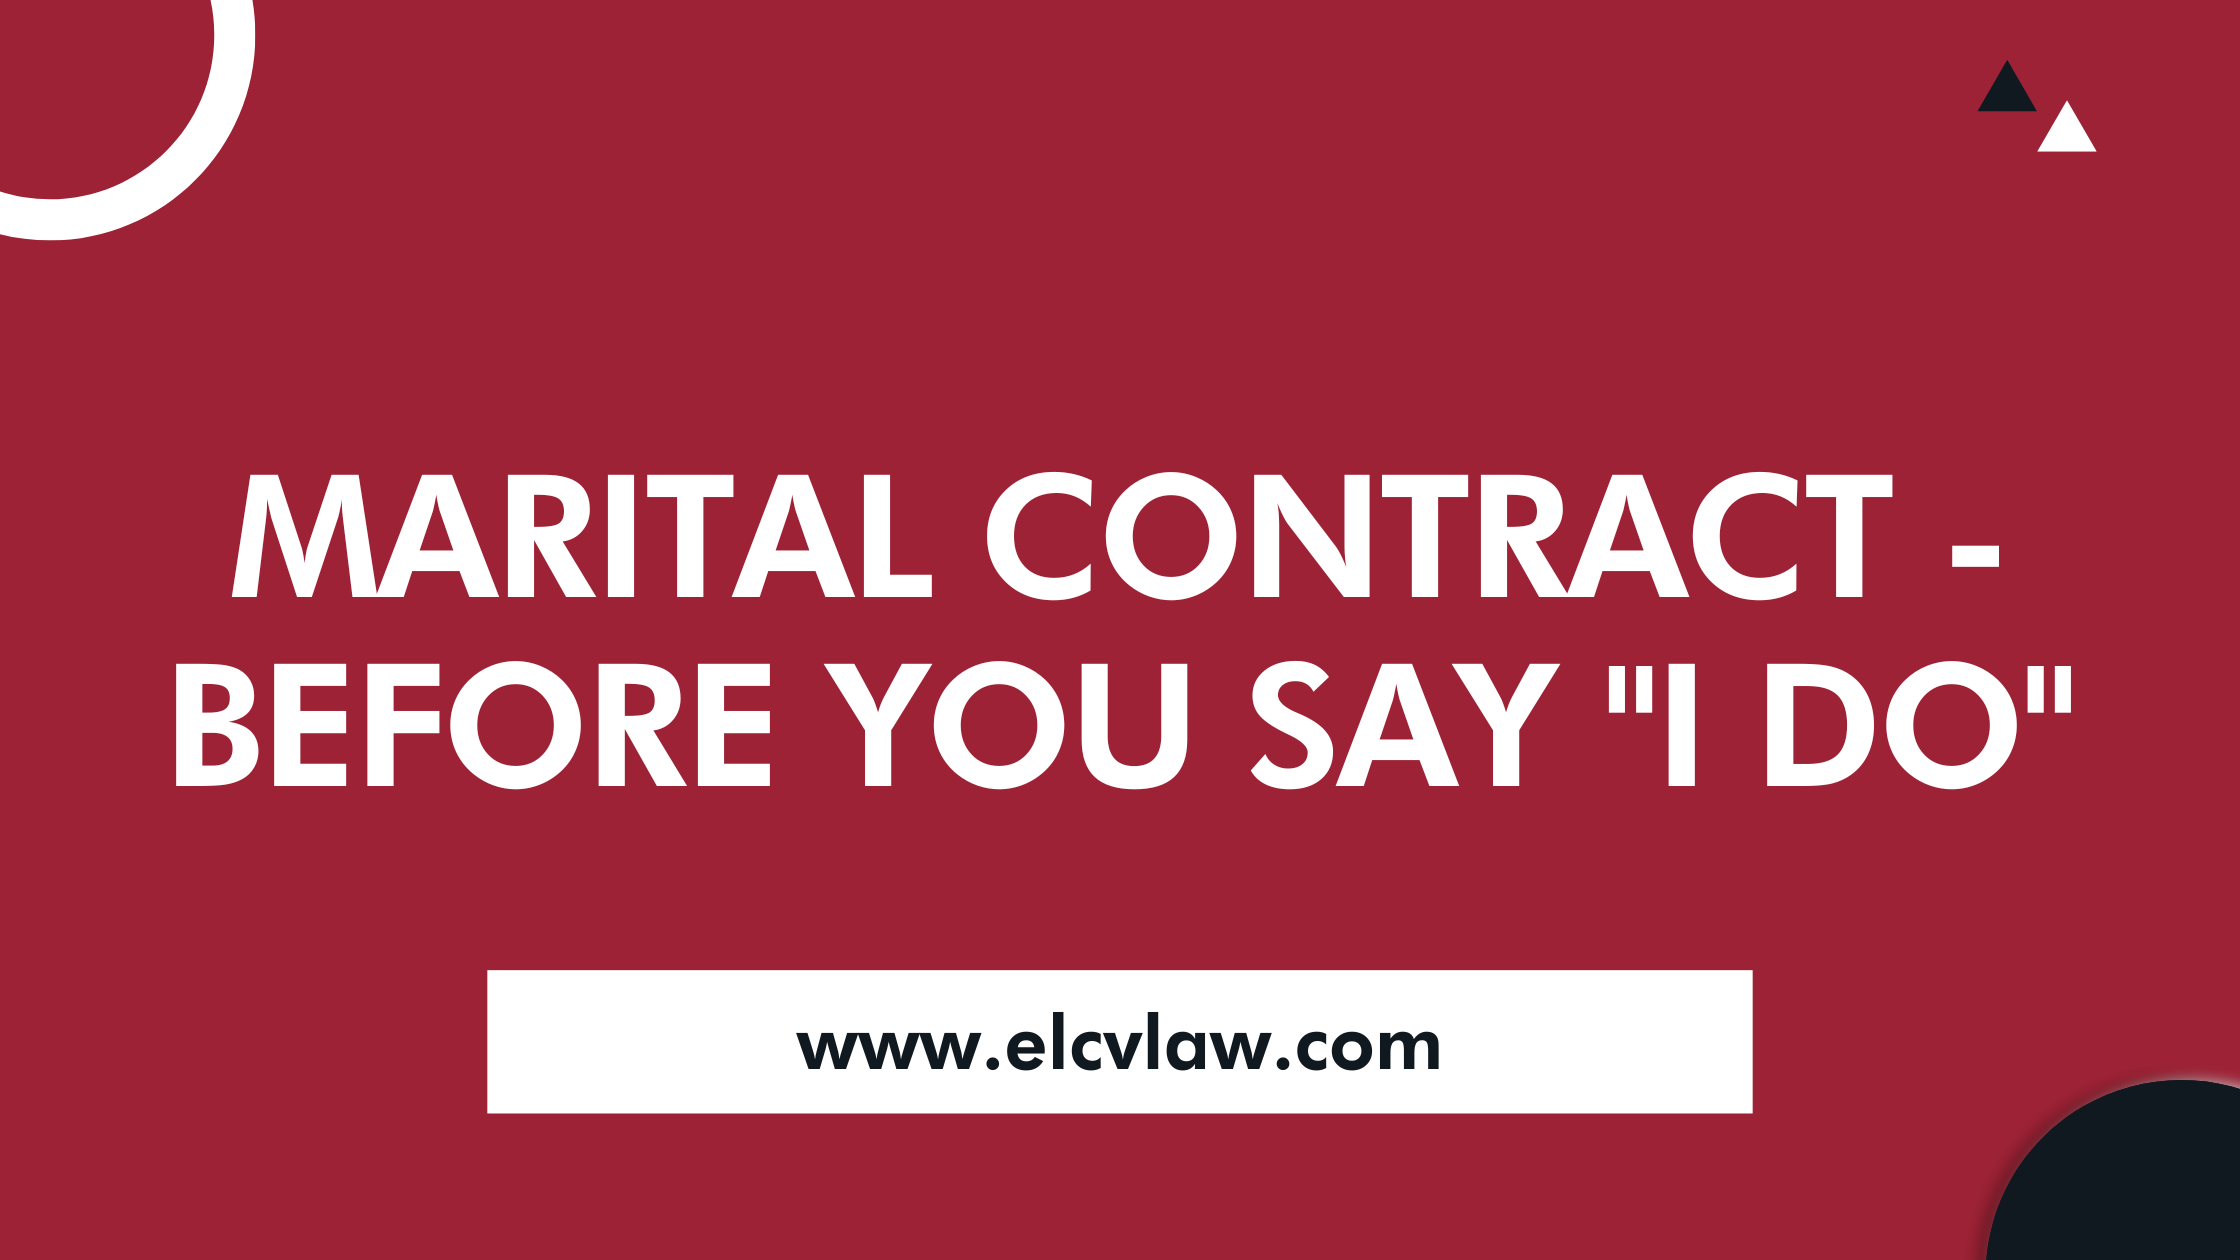 Marital Contract - Before You Say "I do"